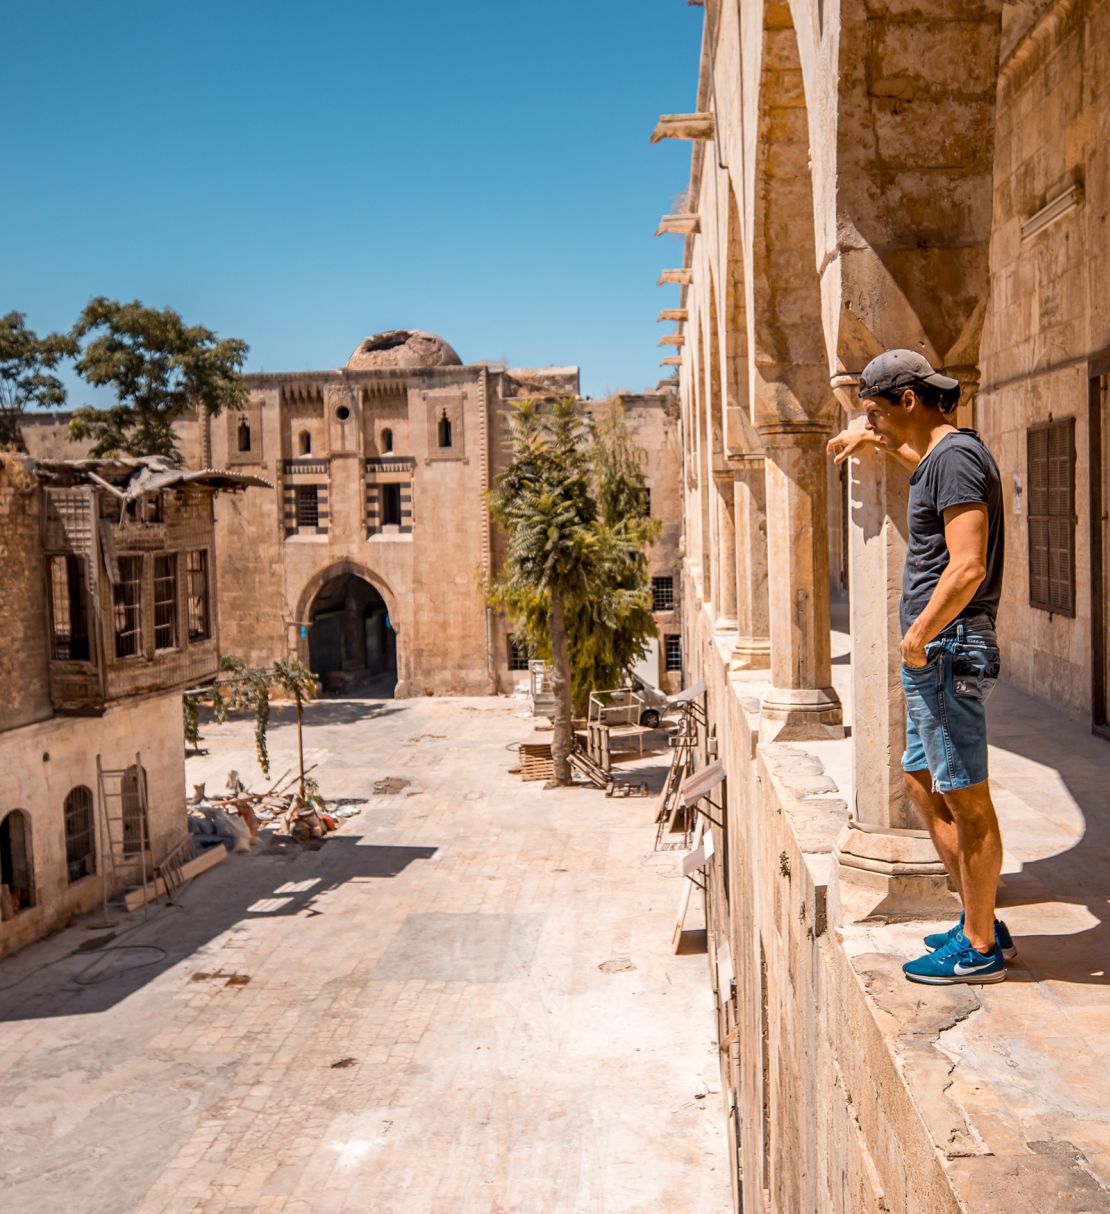 Tom Grond has been traveling the world for nearly 10 years, but he says it was his 2019 trip to Syria that had the biggest impact.